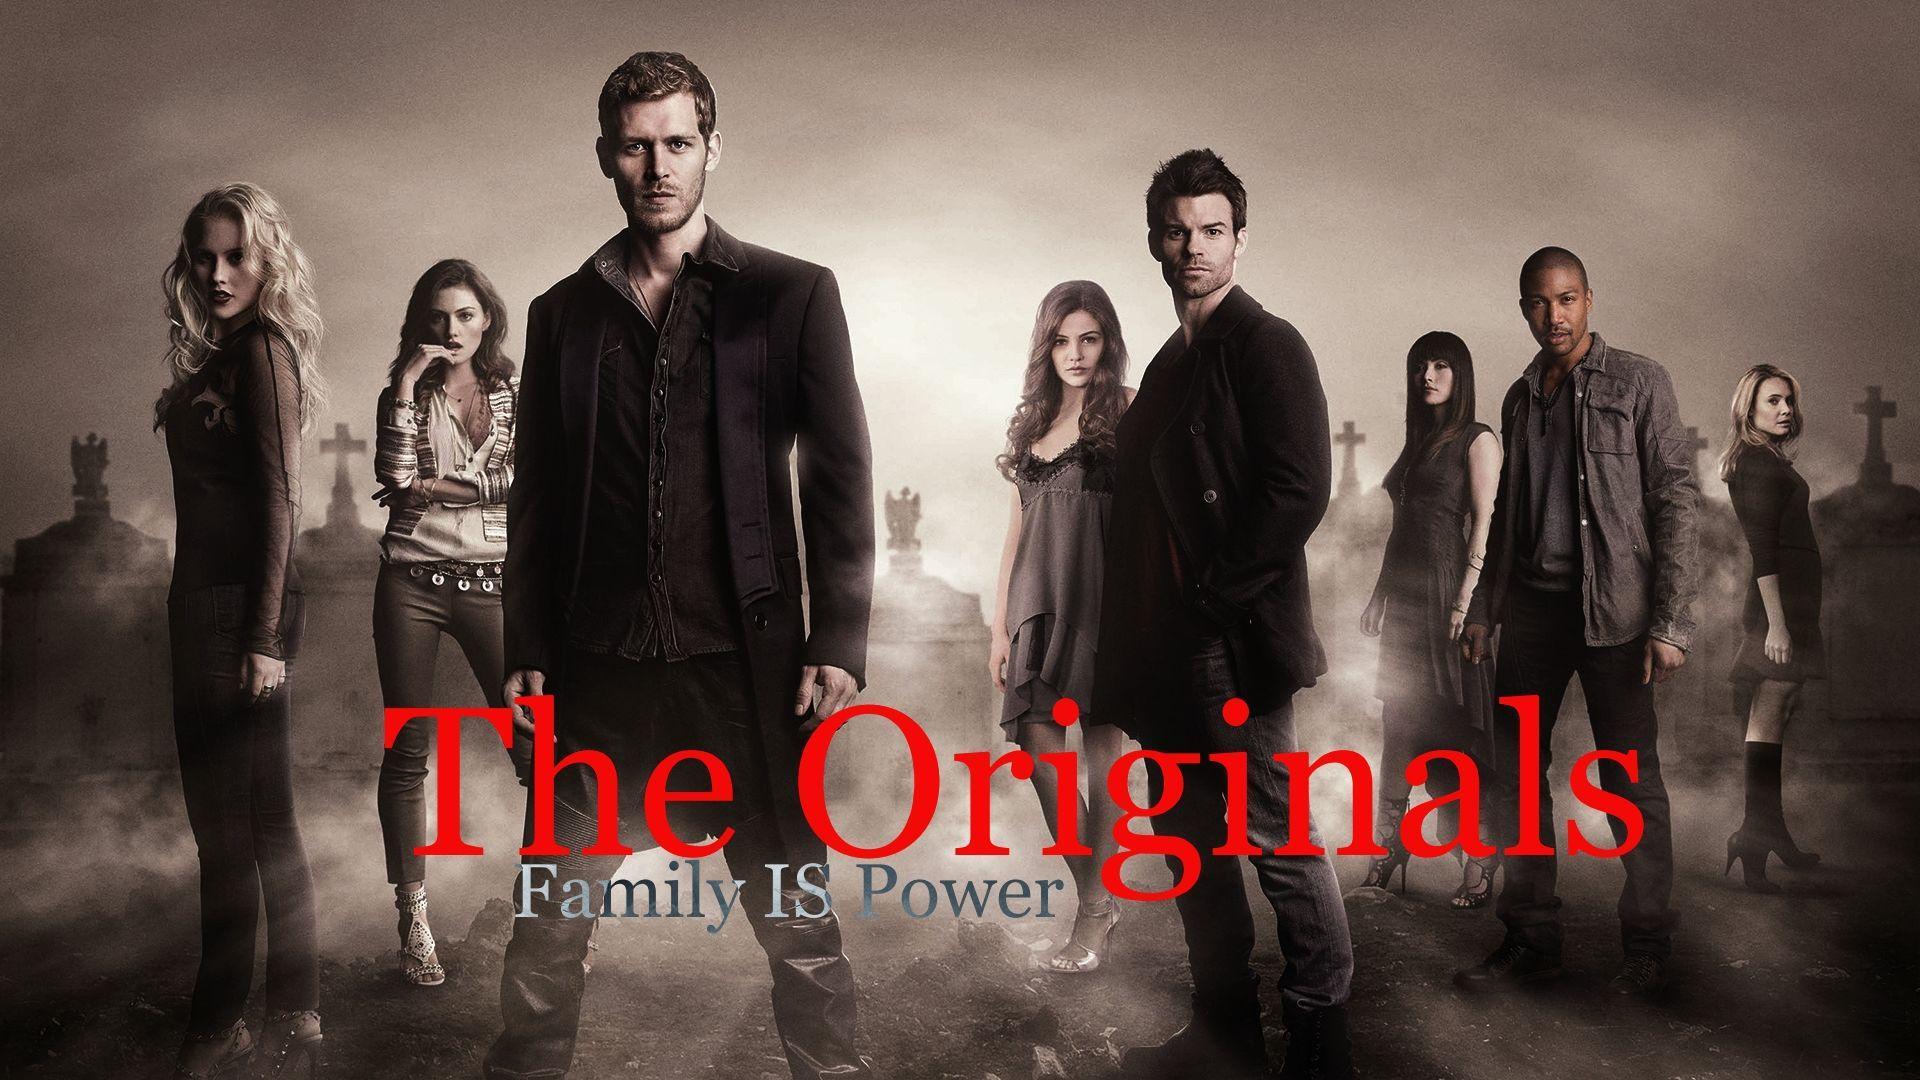 The Originals Wallpaper High Resolution and Quality Download